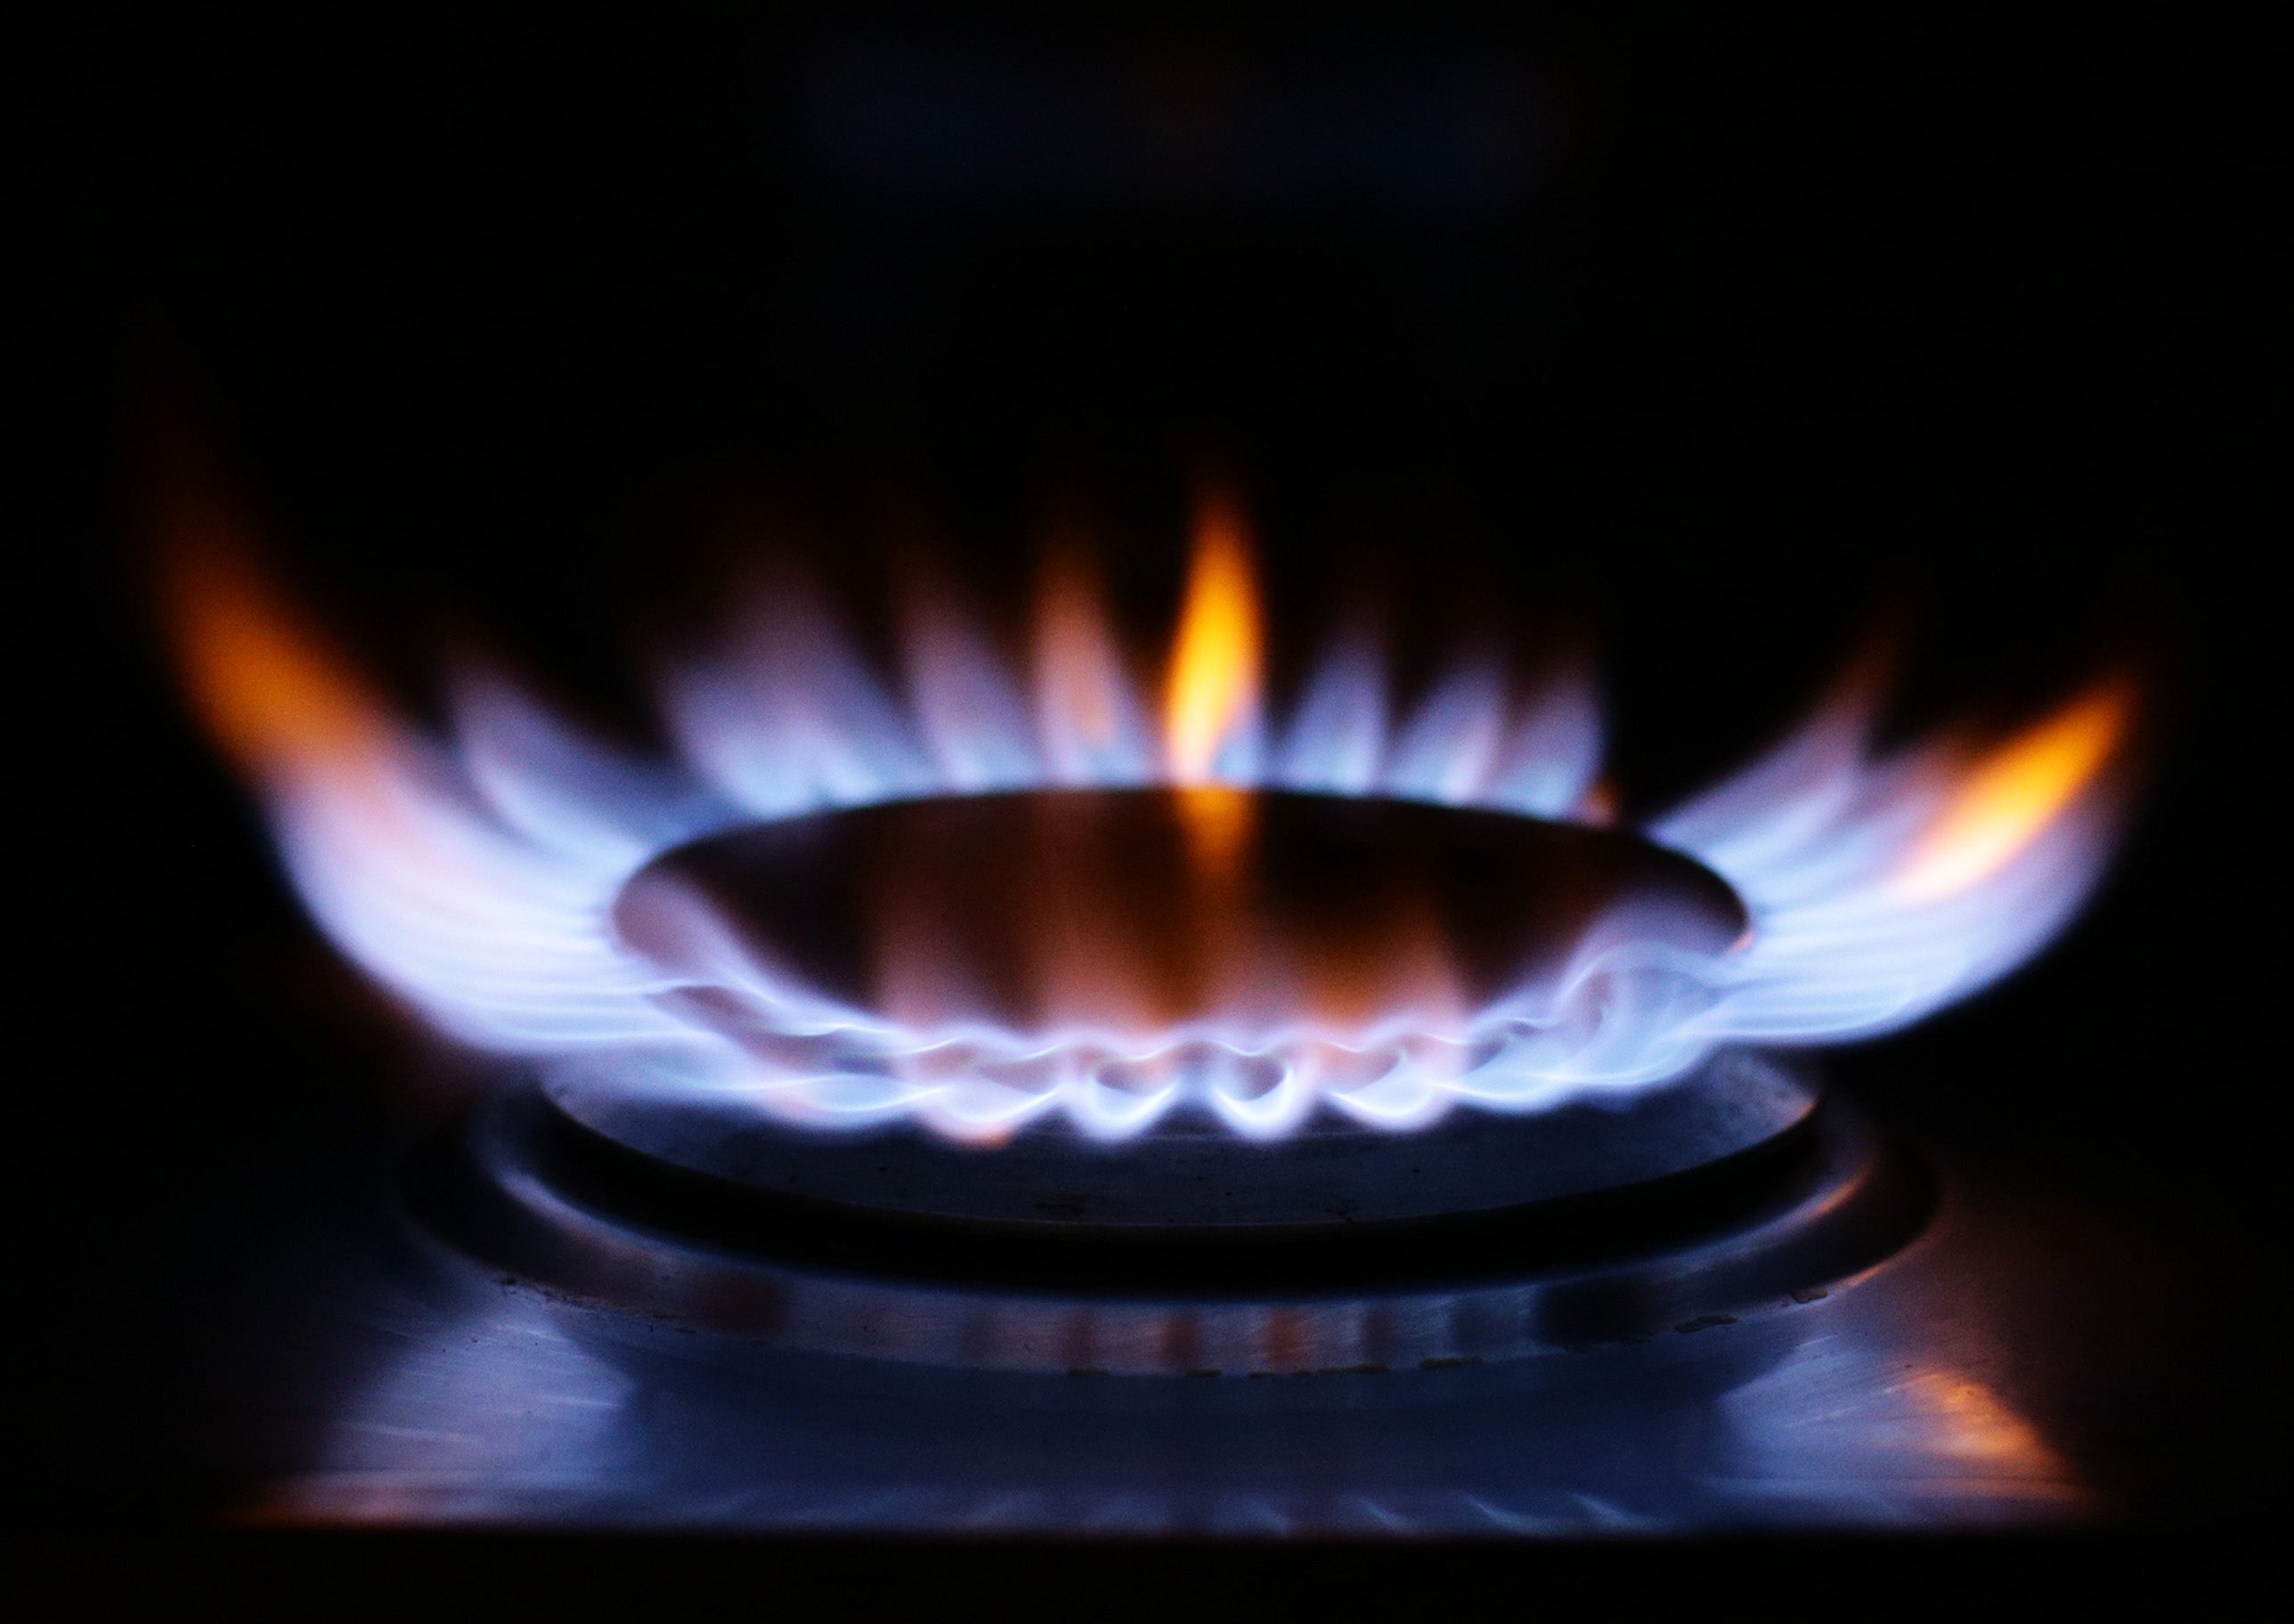 The ongoing crisis affecting UK energy suppliers has raised questions about energy regulator Ofgem’s oversight of the market